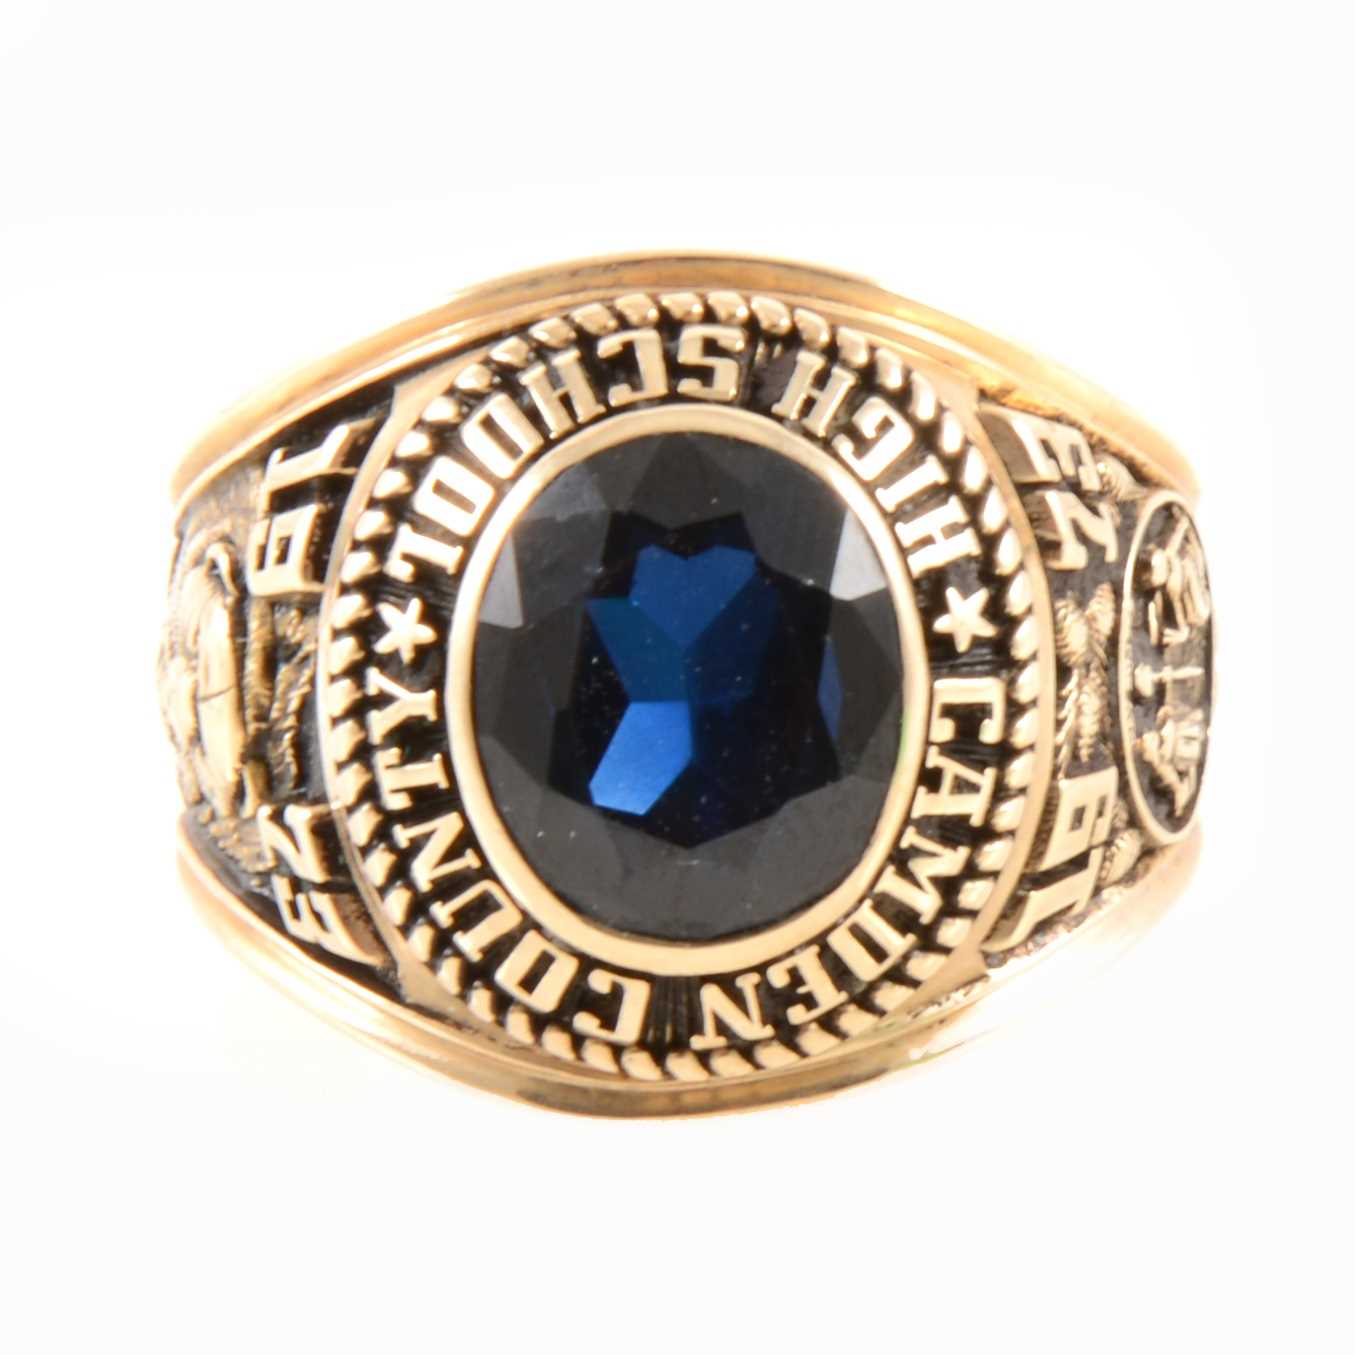 Lot 283 - An American college ring.